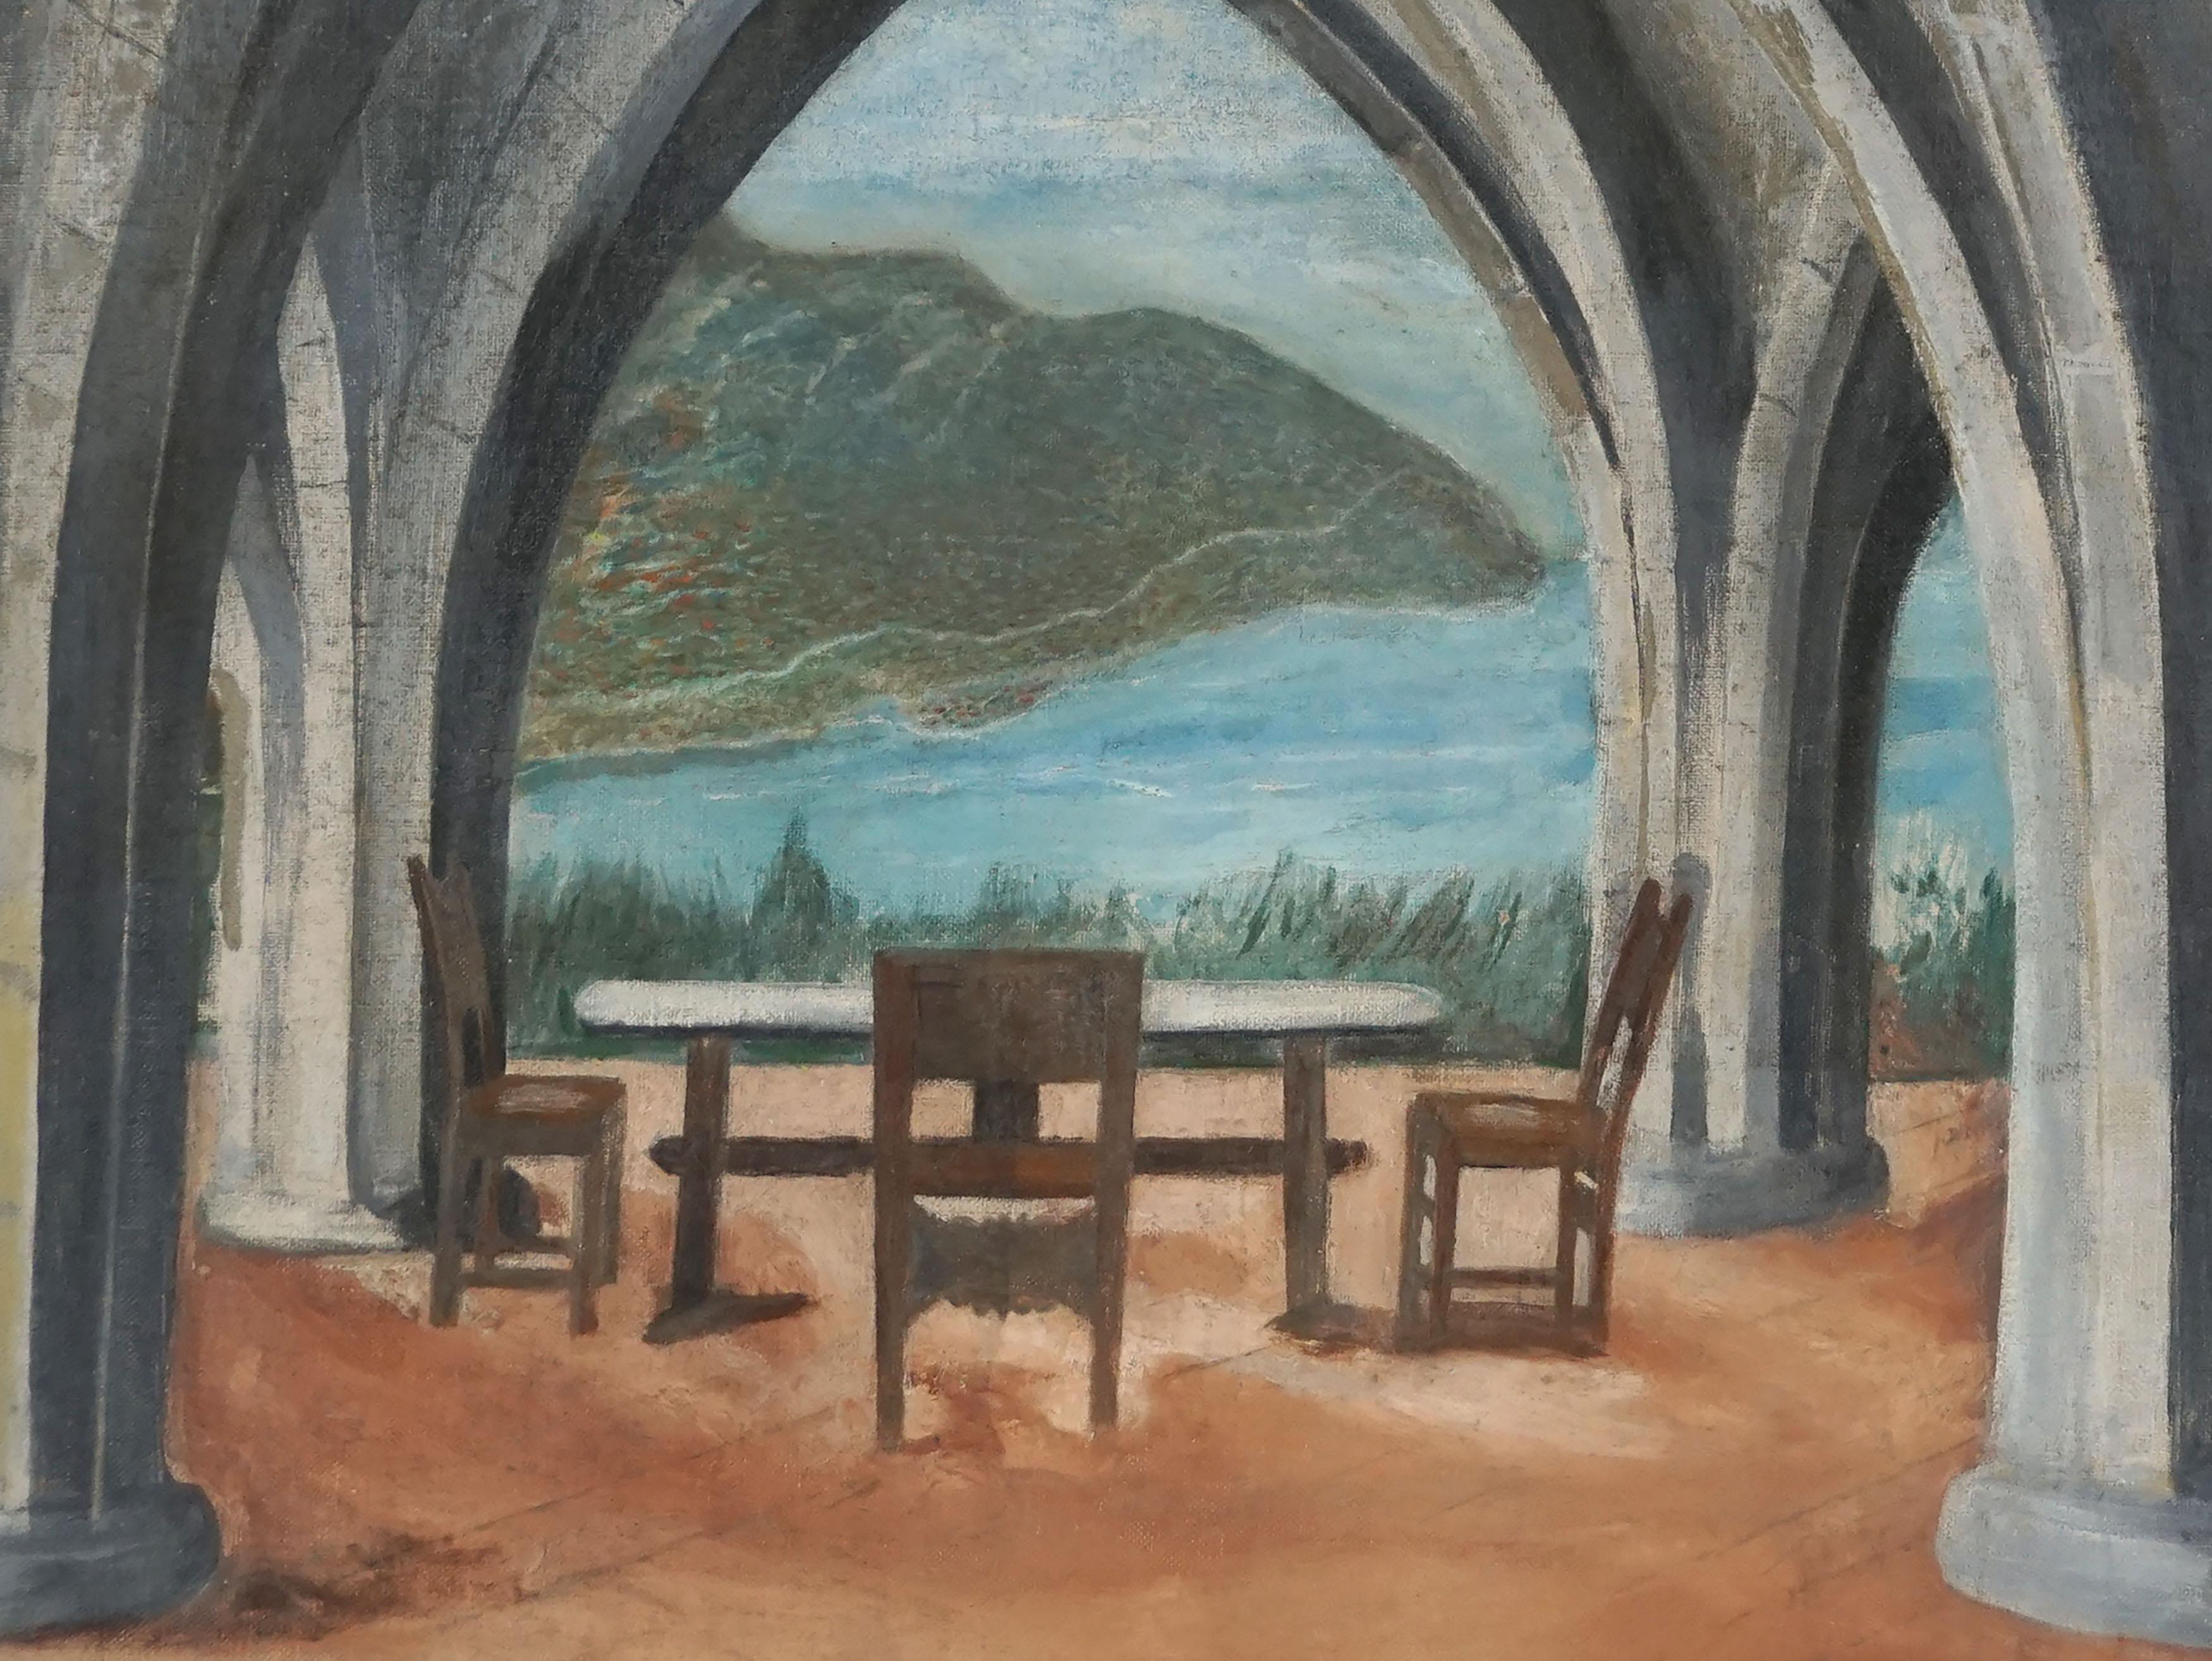 Mid Century Ravello Amalfi Coast Original Oil Painting - Villa Cimbrone La Cripta

Wonderful perspective of the Gothic Arches of Villa Cimbrone's Crypt by D. Grillo (American, 20th Century), circa 1950. Sitting high atop a promontory that offers